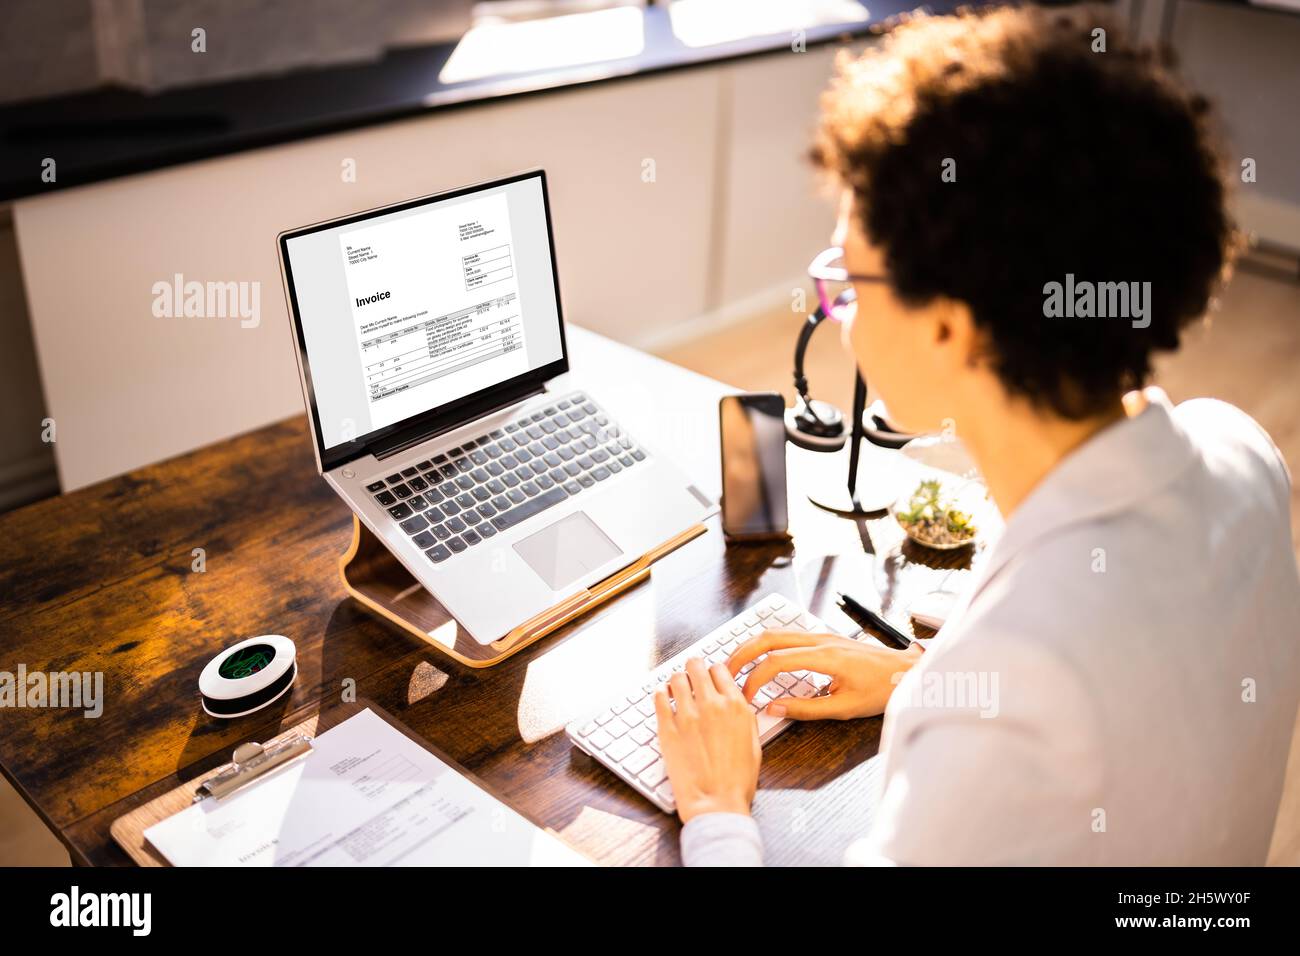 E Invoice Business Management. Accountant Using Electronic Invoice Stock Photo